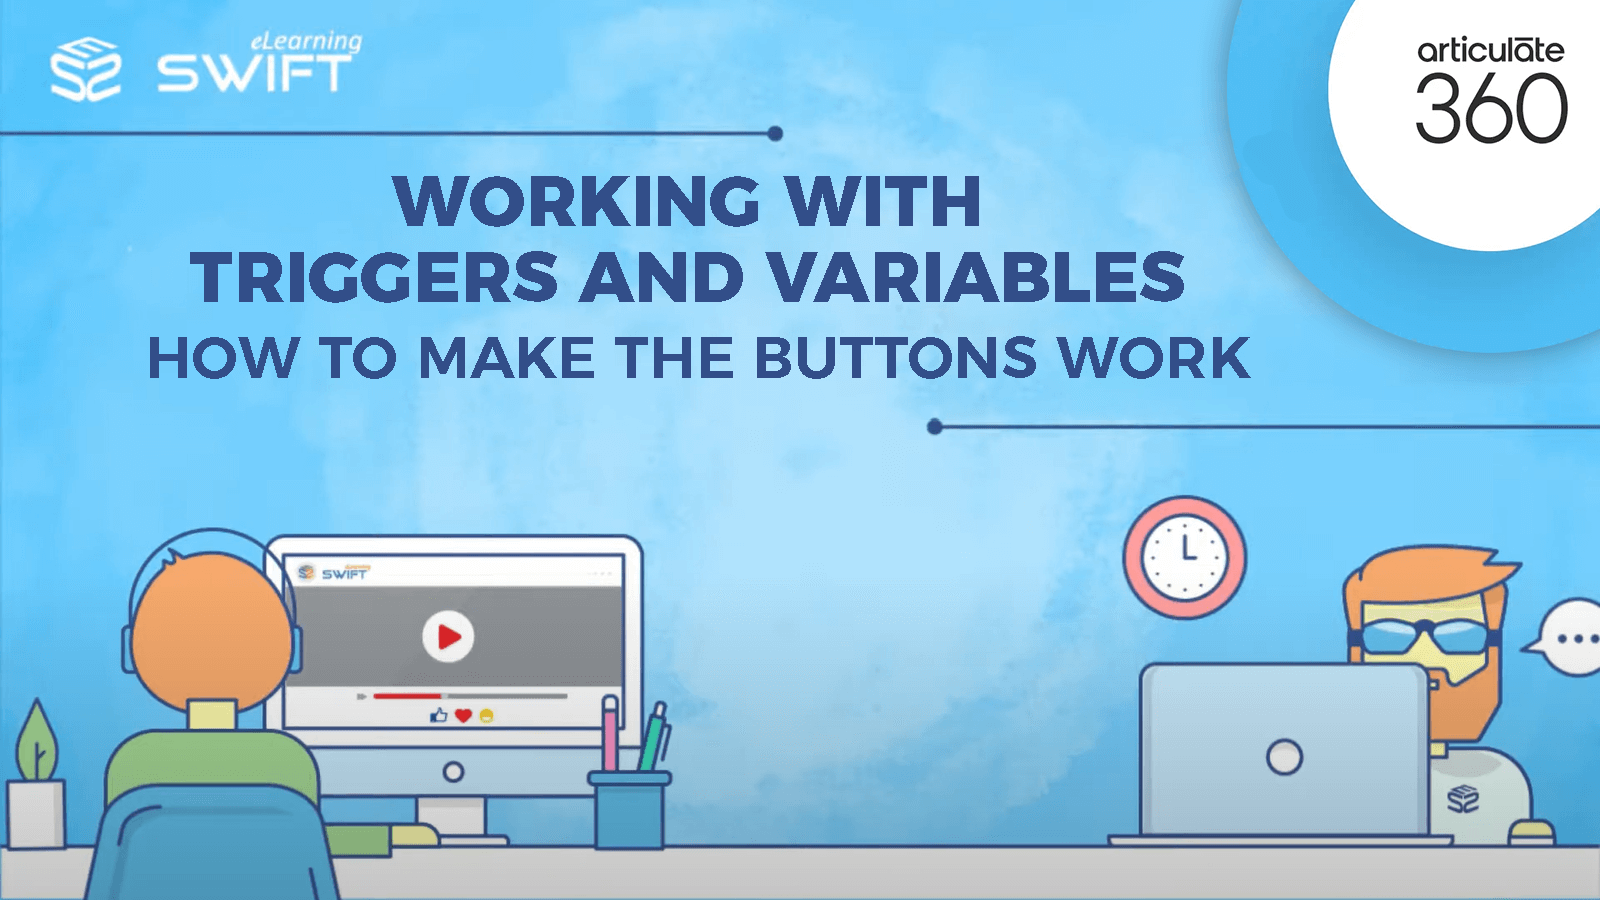 How to Make the Buttons Work